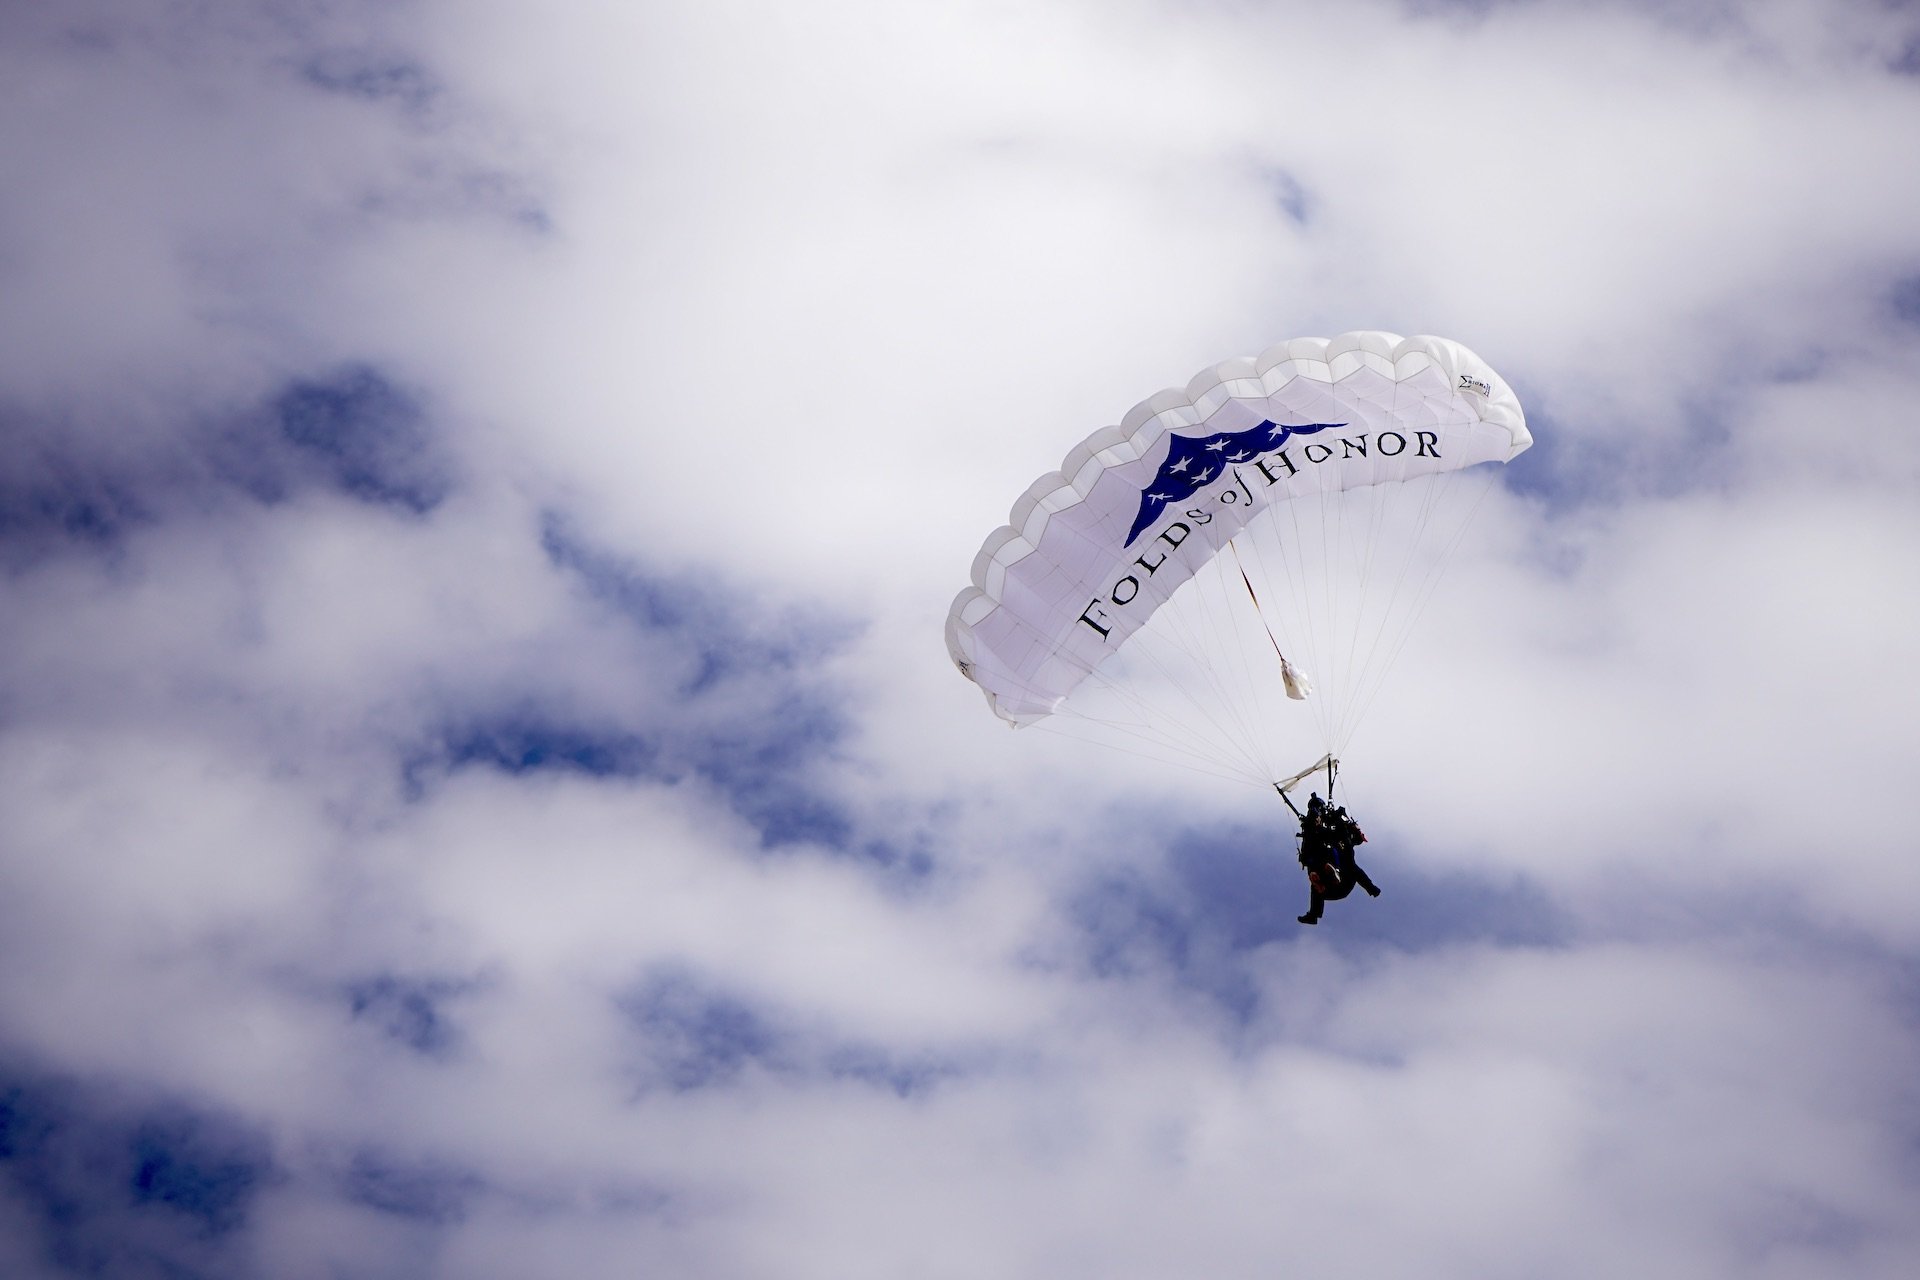 Triple 7 Expedition: Folds of Honor parachute